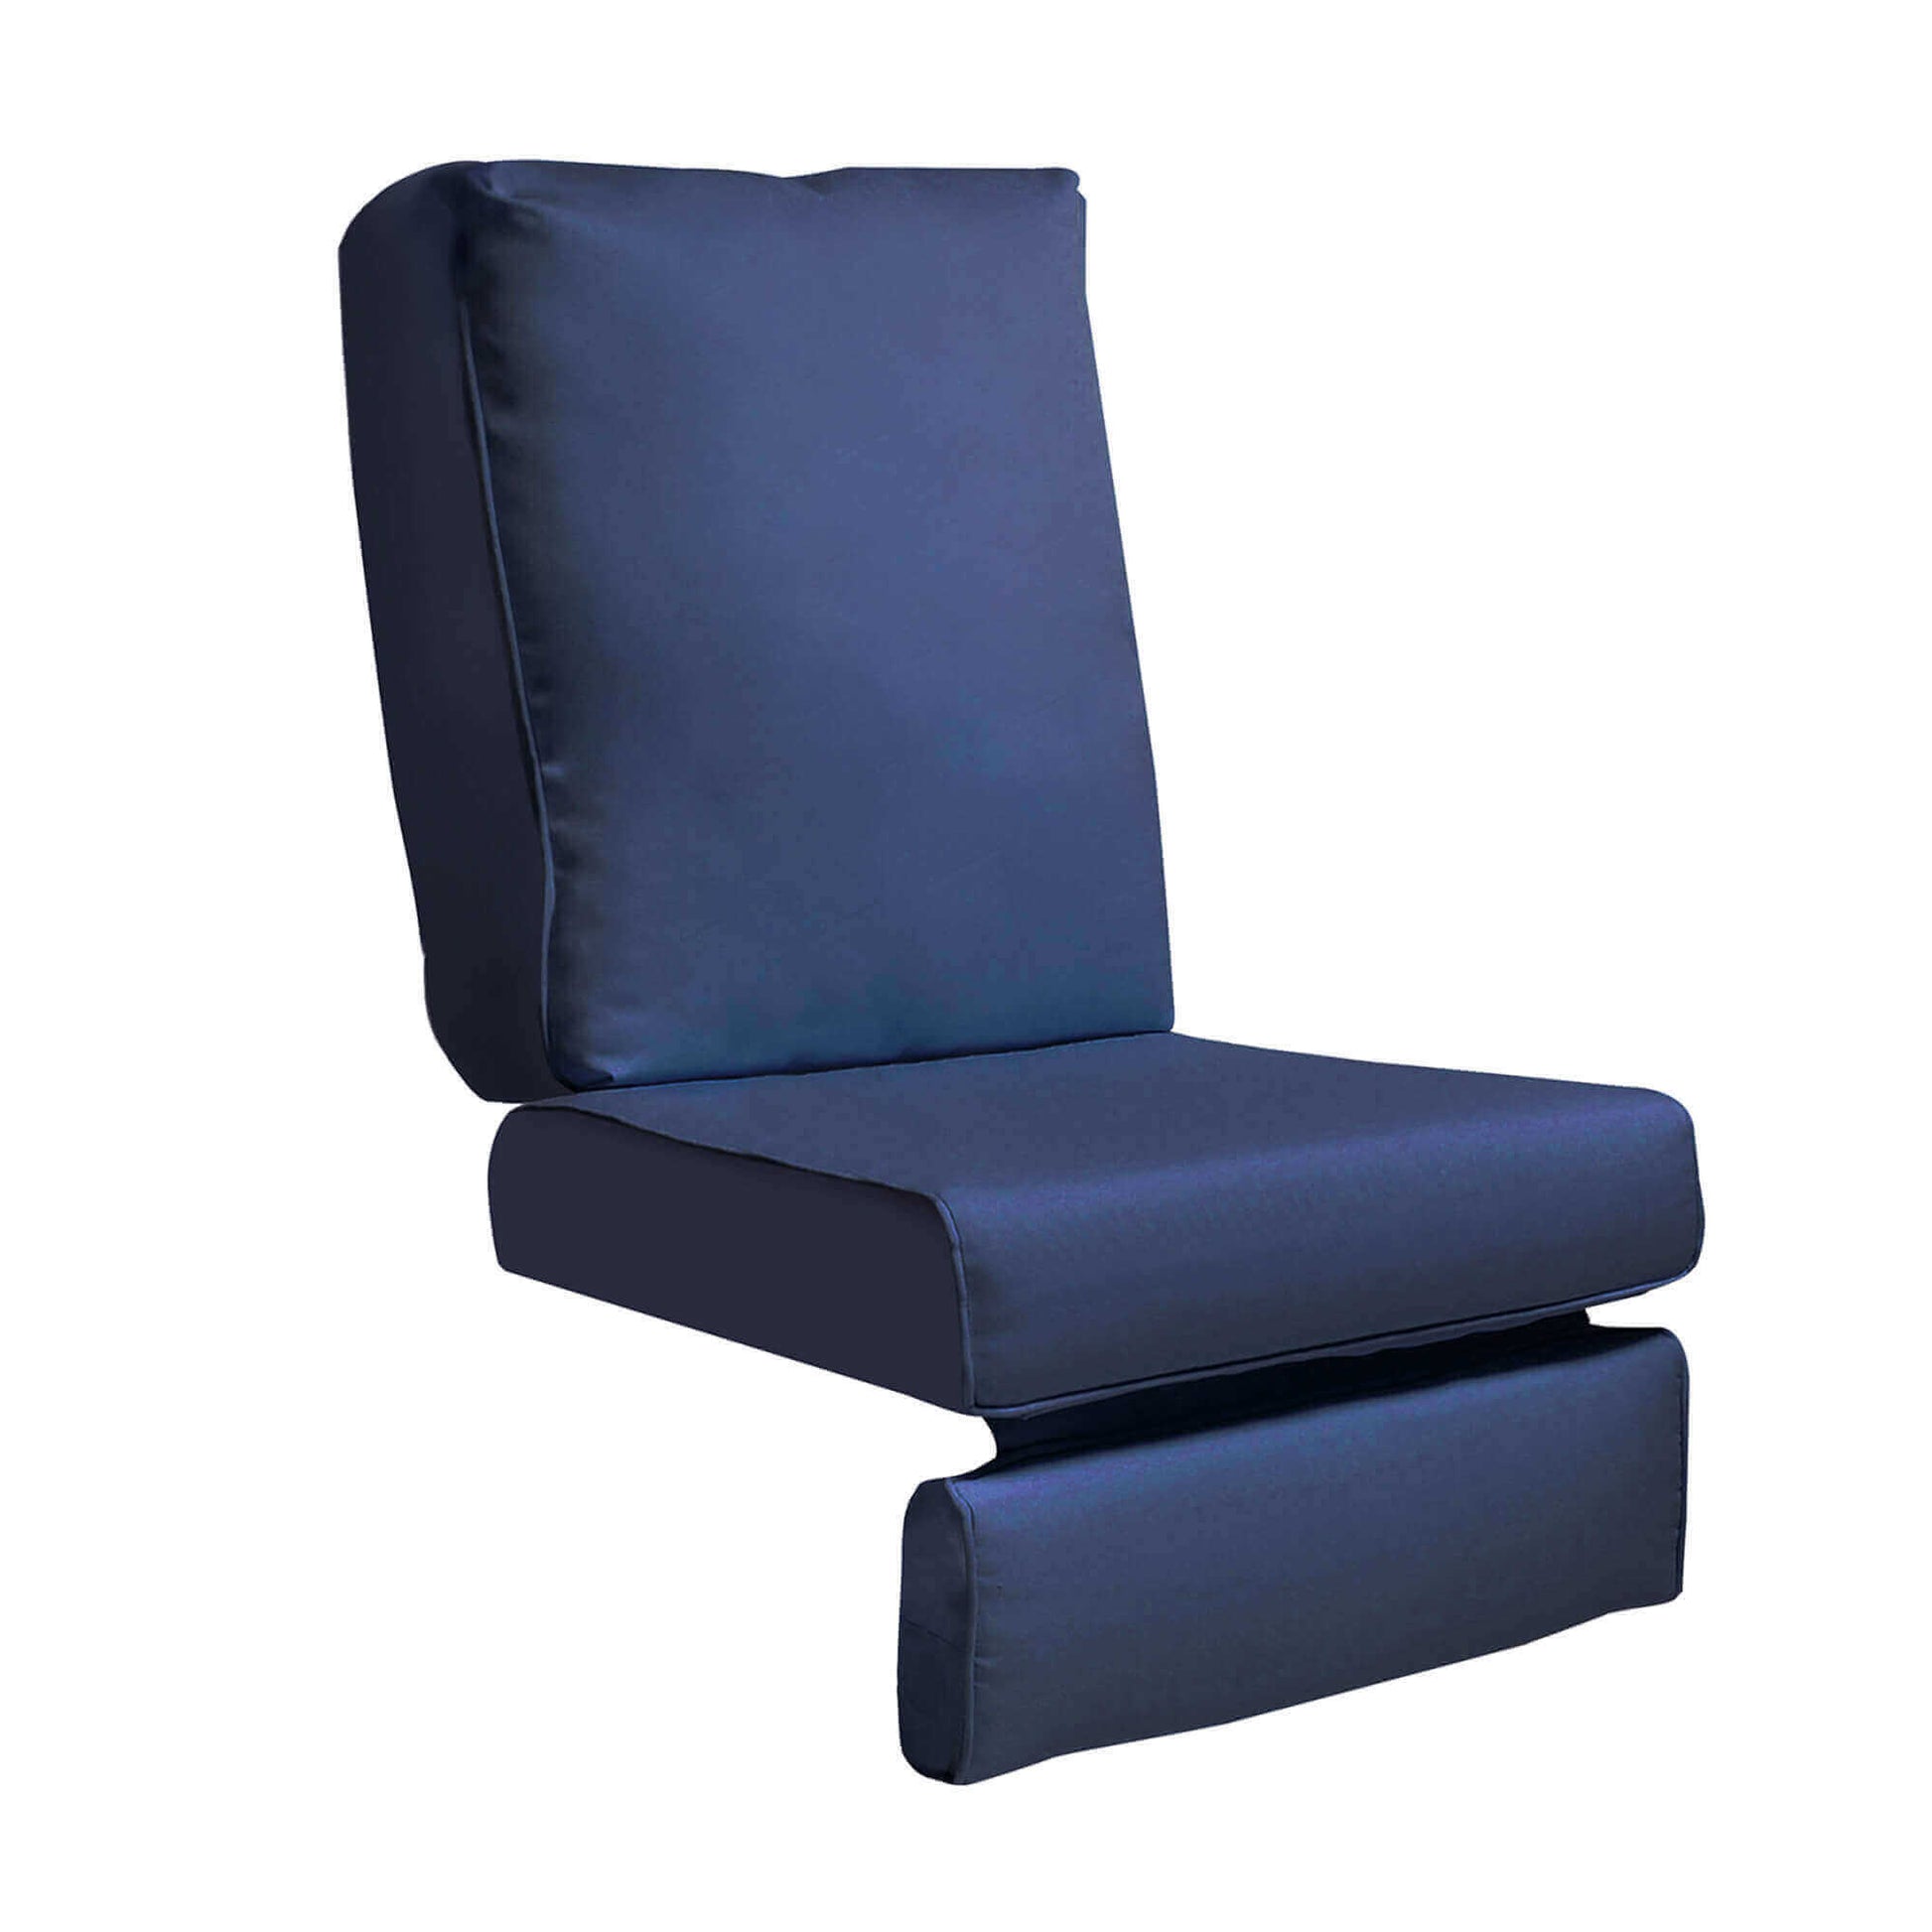 Full Cushion for recliner chair – Available in various colours